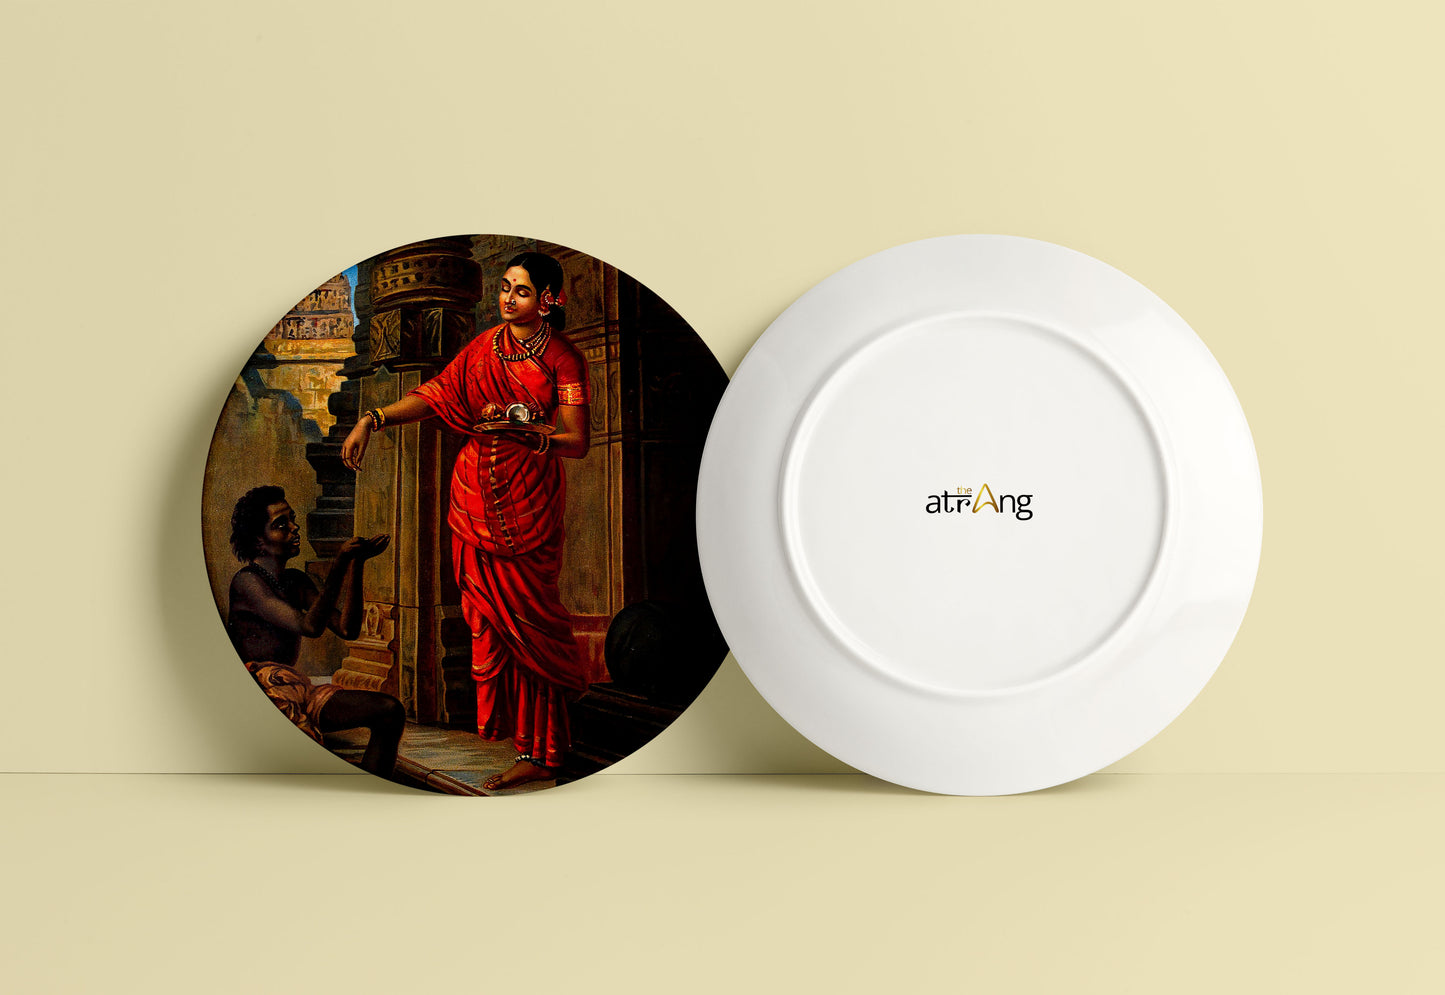 A woman giving alms to a beggar outside a temple to Lord Shiva by Ravi Varma Ceramic Plate for Home Decor